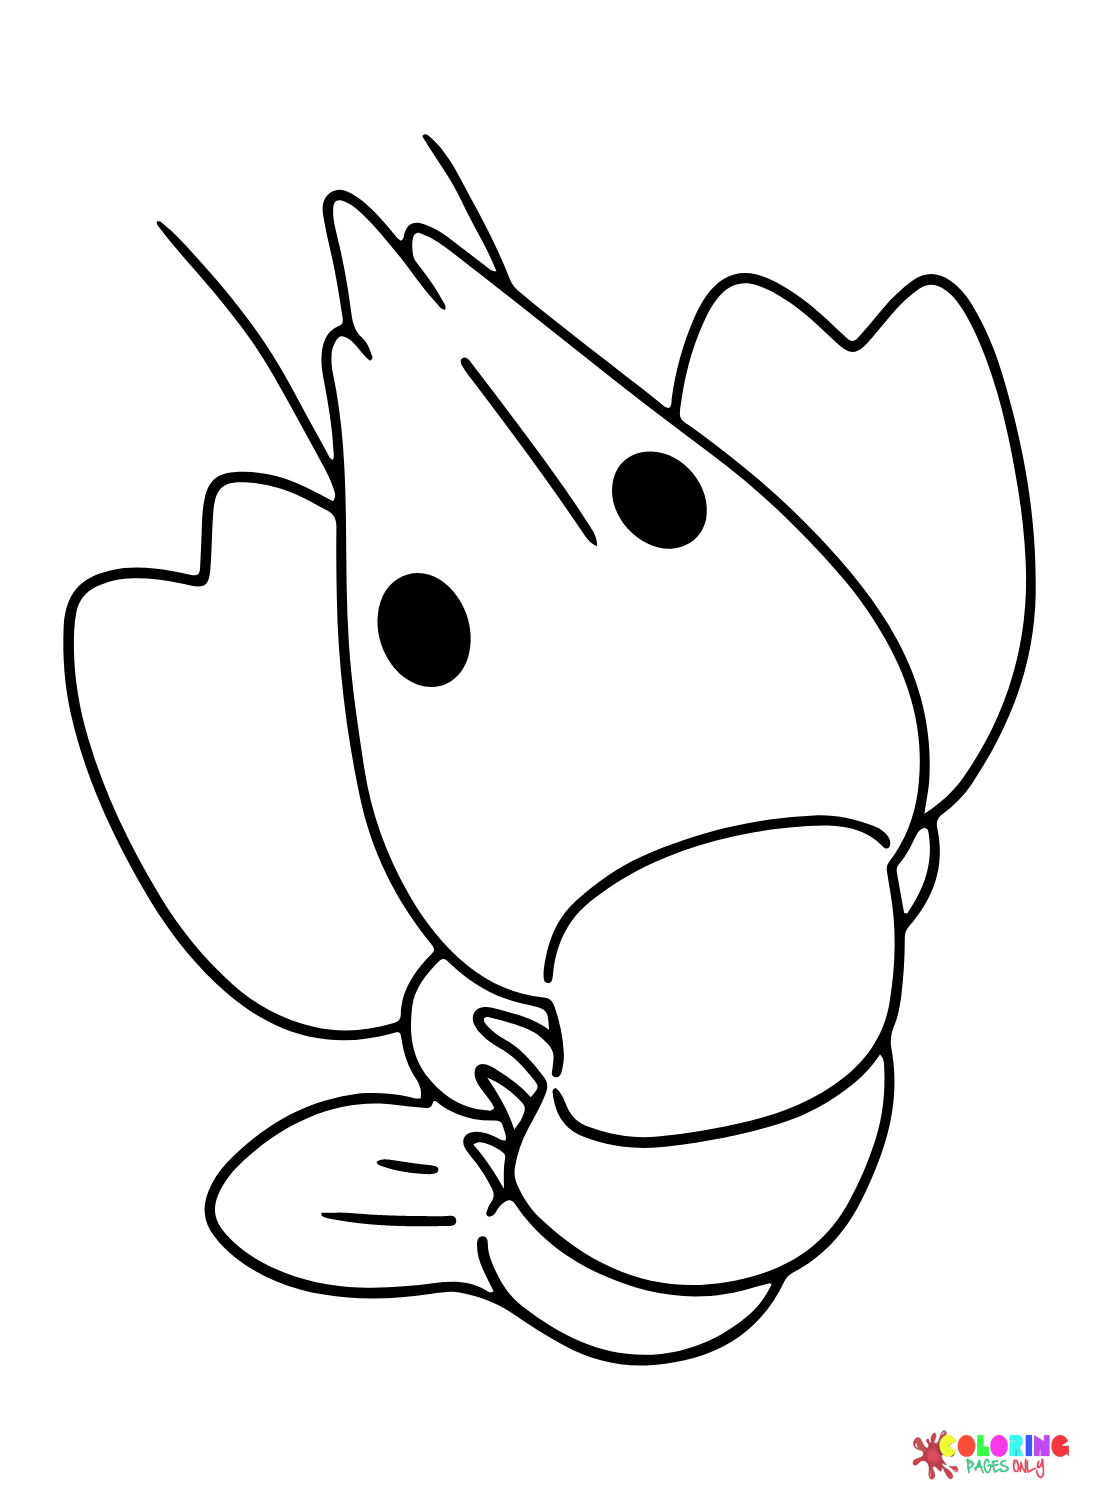 Cute Lobster Coloring Page